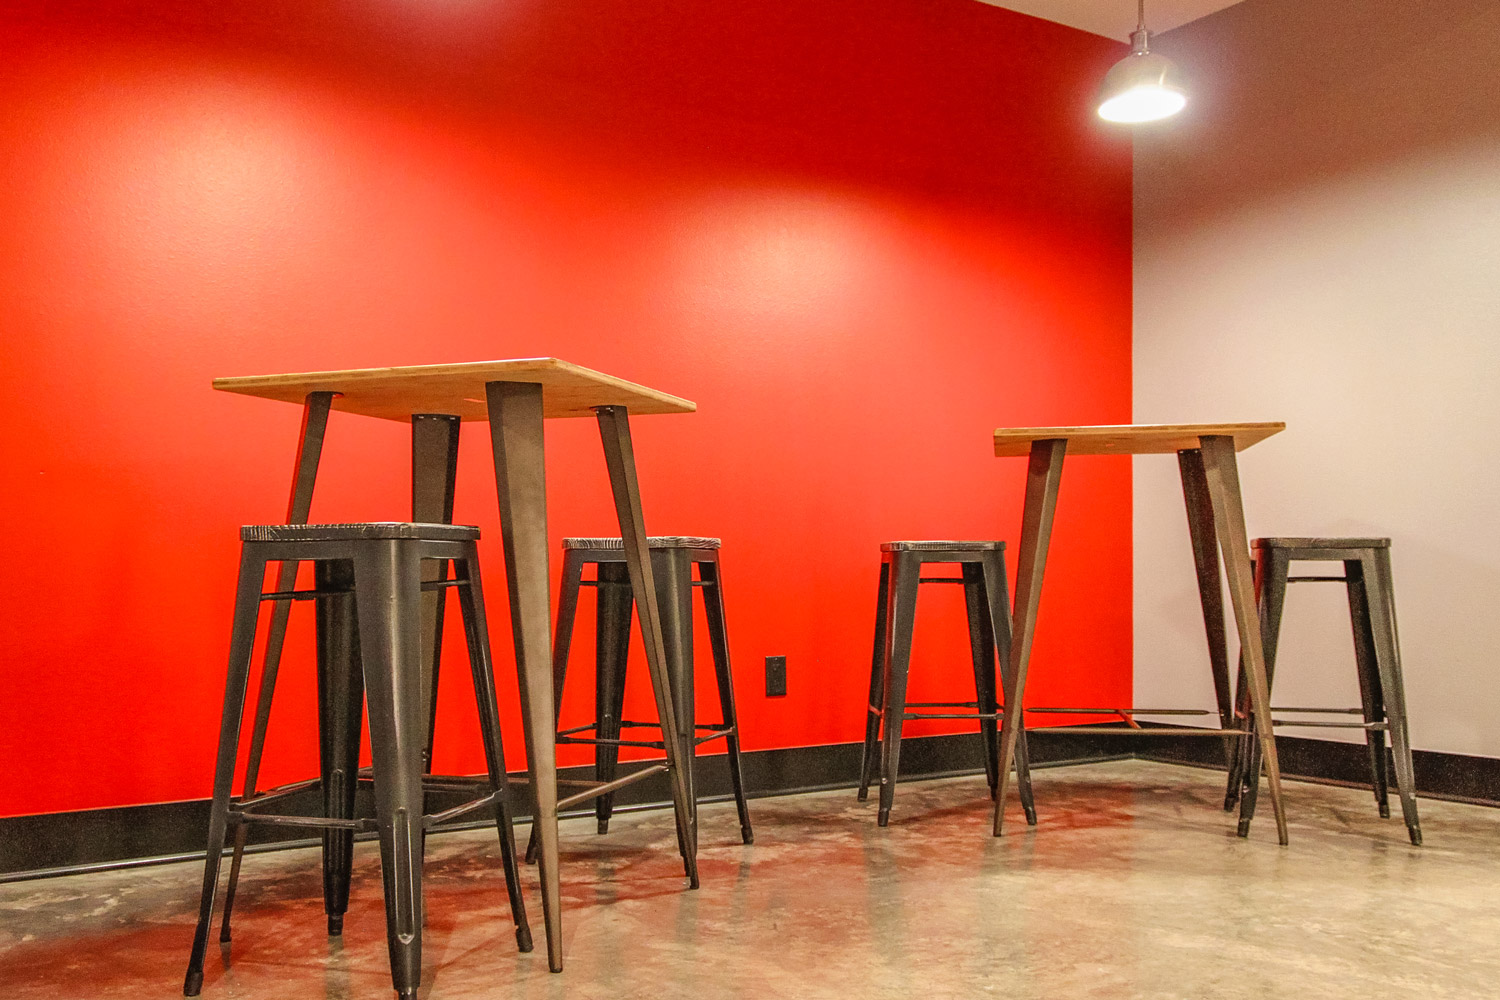 red wall color basement bar designs